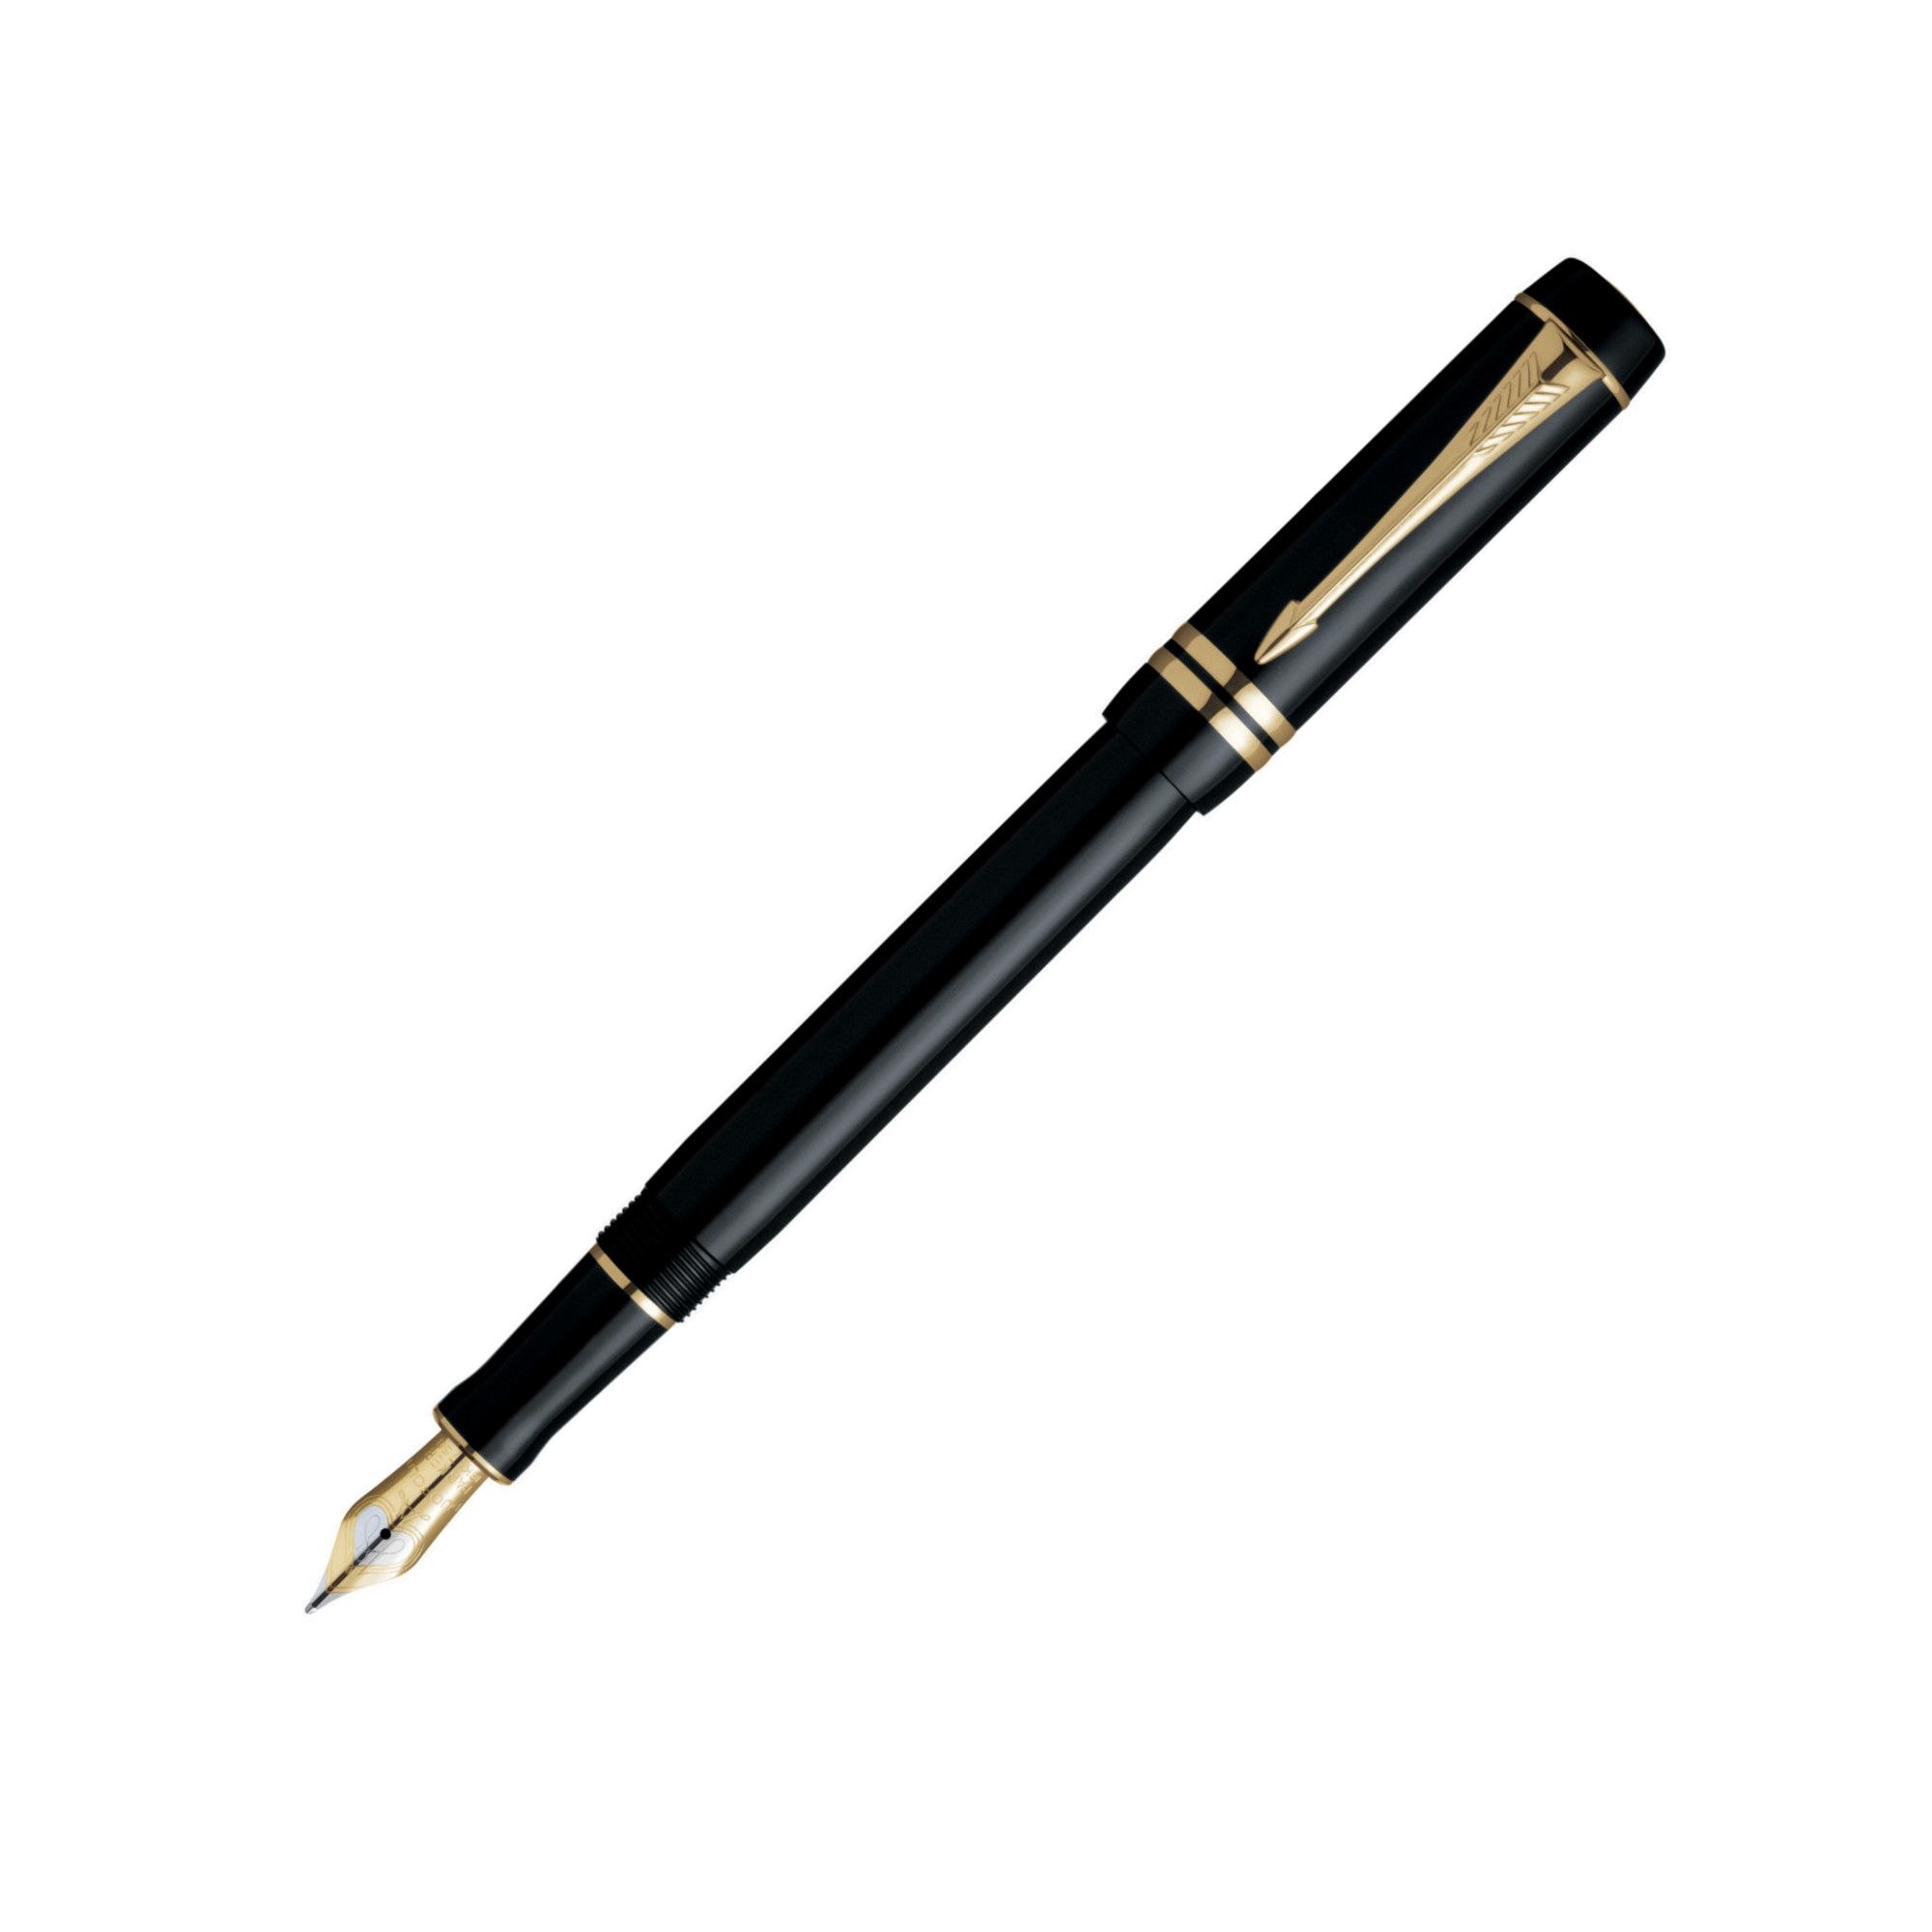 Parker Duofold Black and Gold International Fountain pen at Tesco Direct